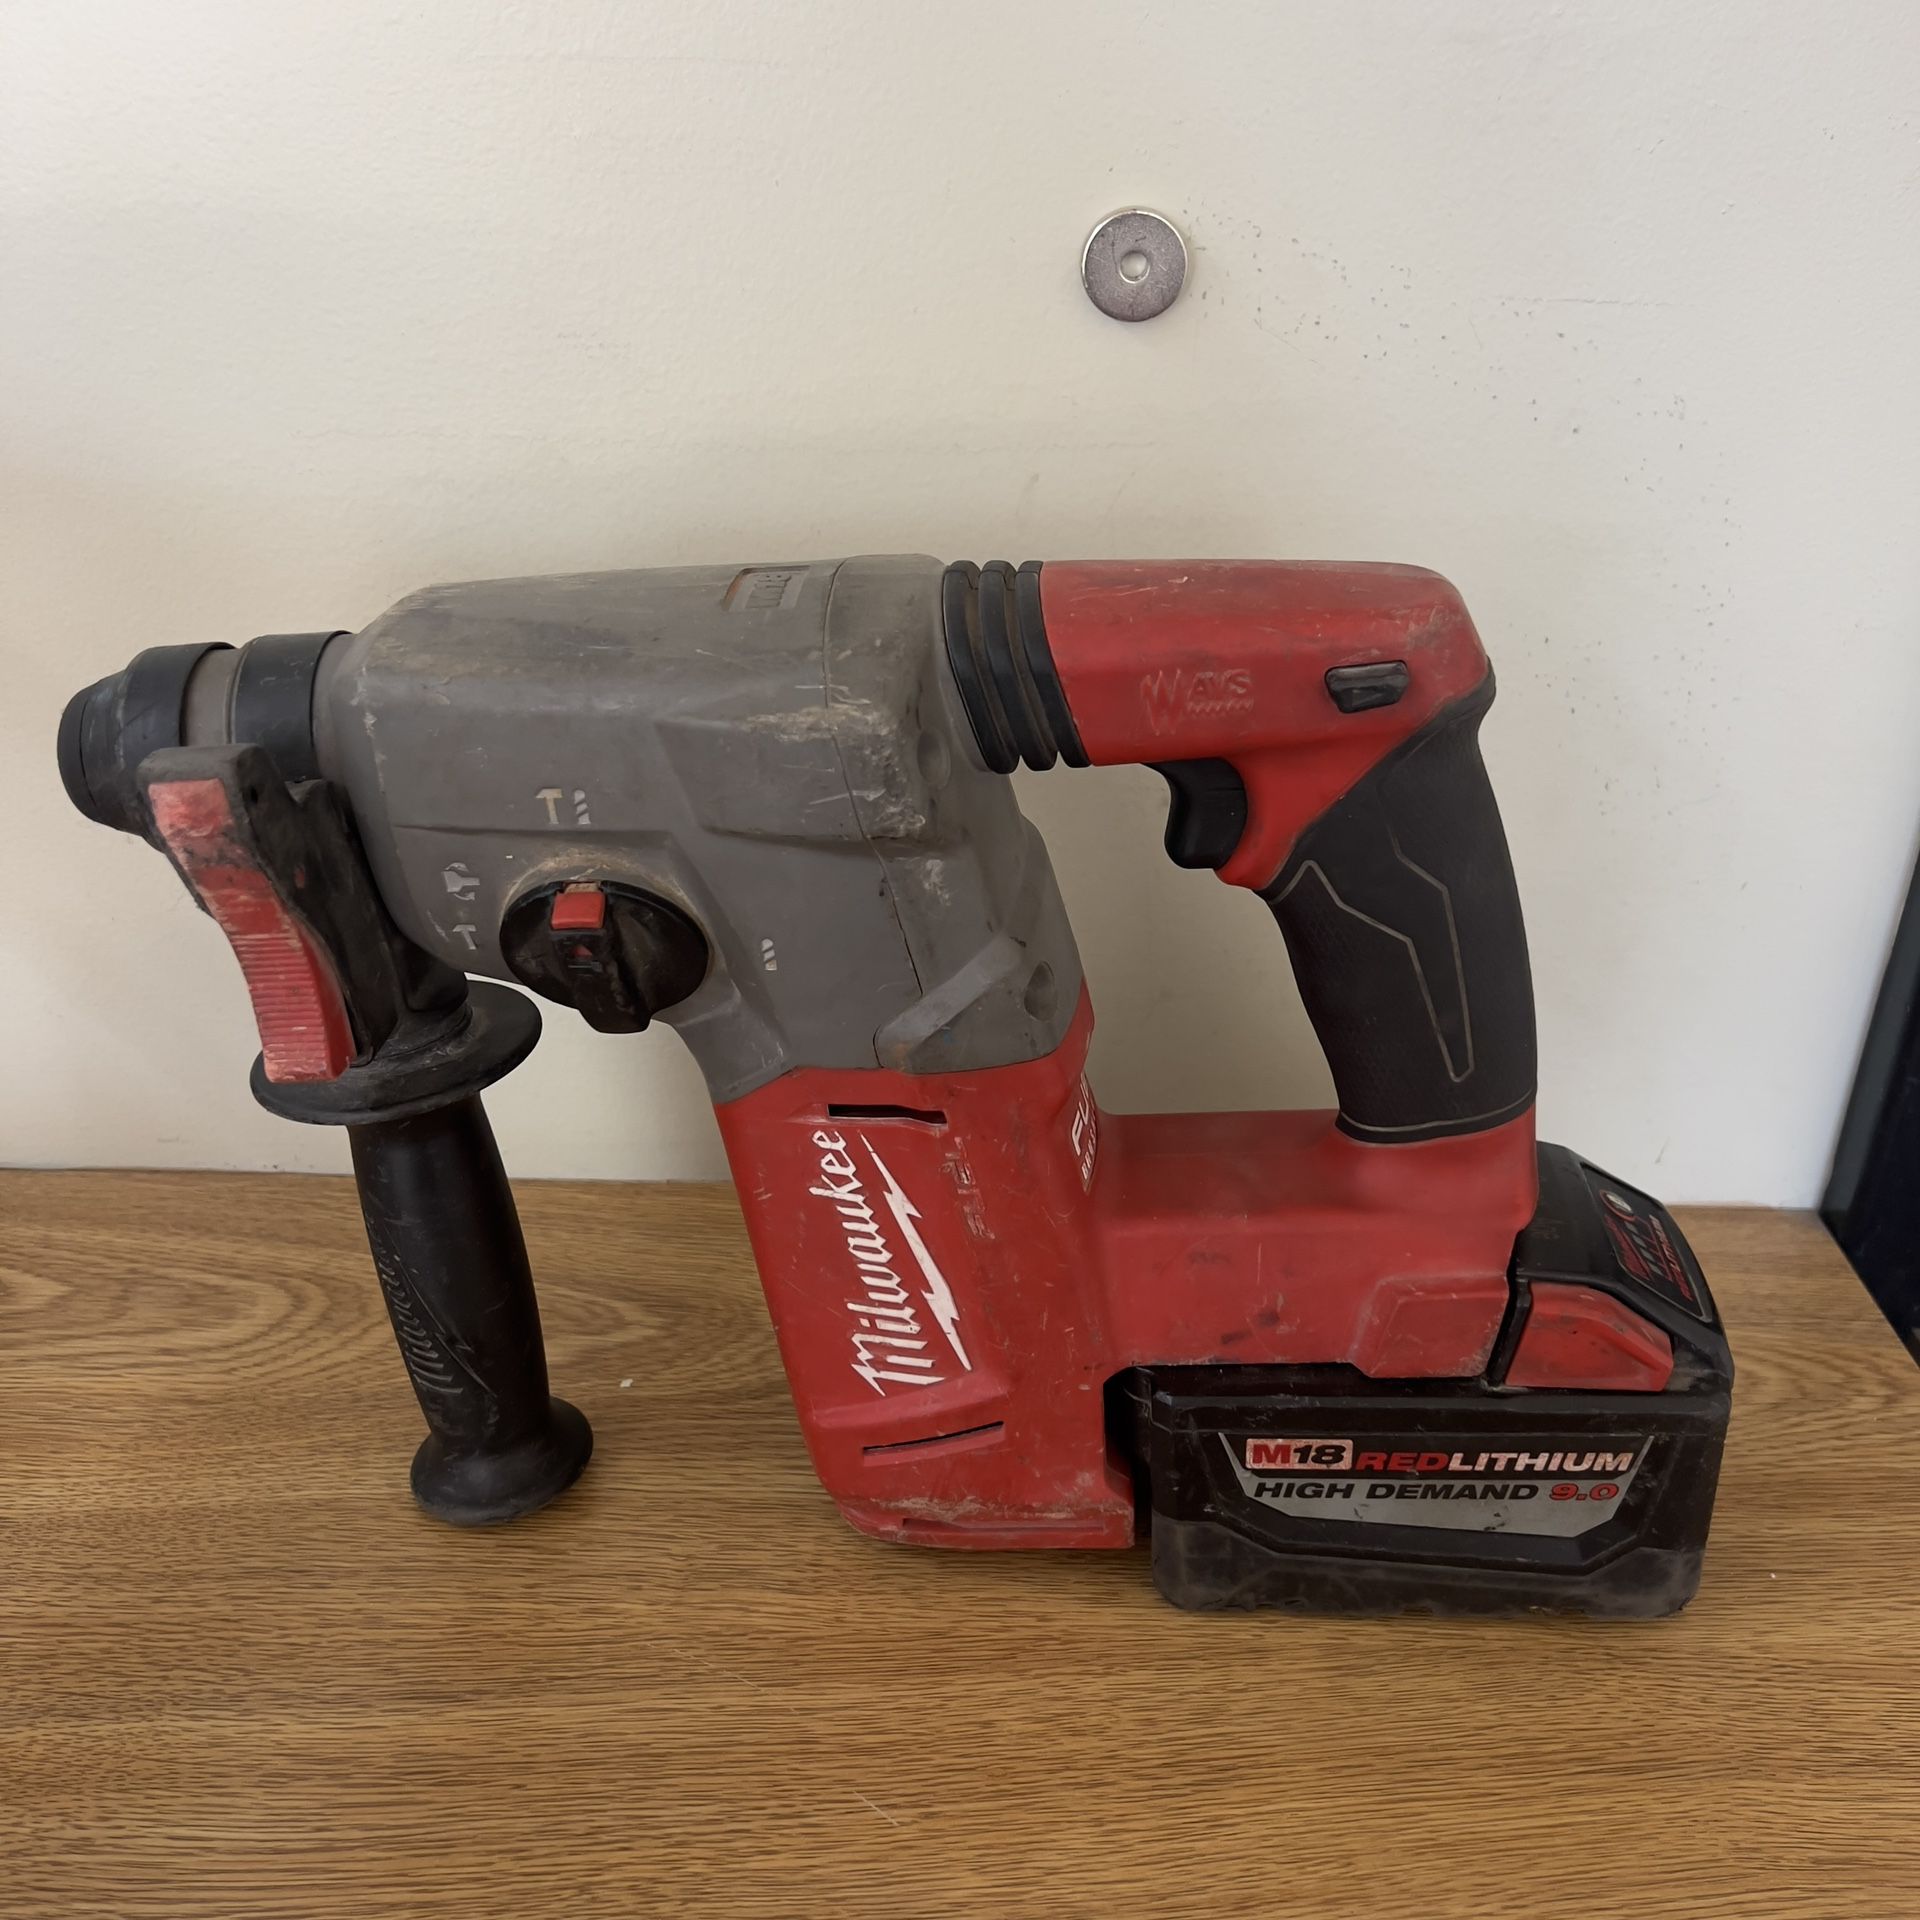 Milwaukee 2712-20 M18 1” SDS-Plus Rotary Hammer With M18 High Demand 9.0 Battery